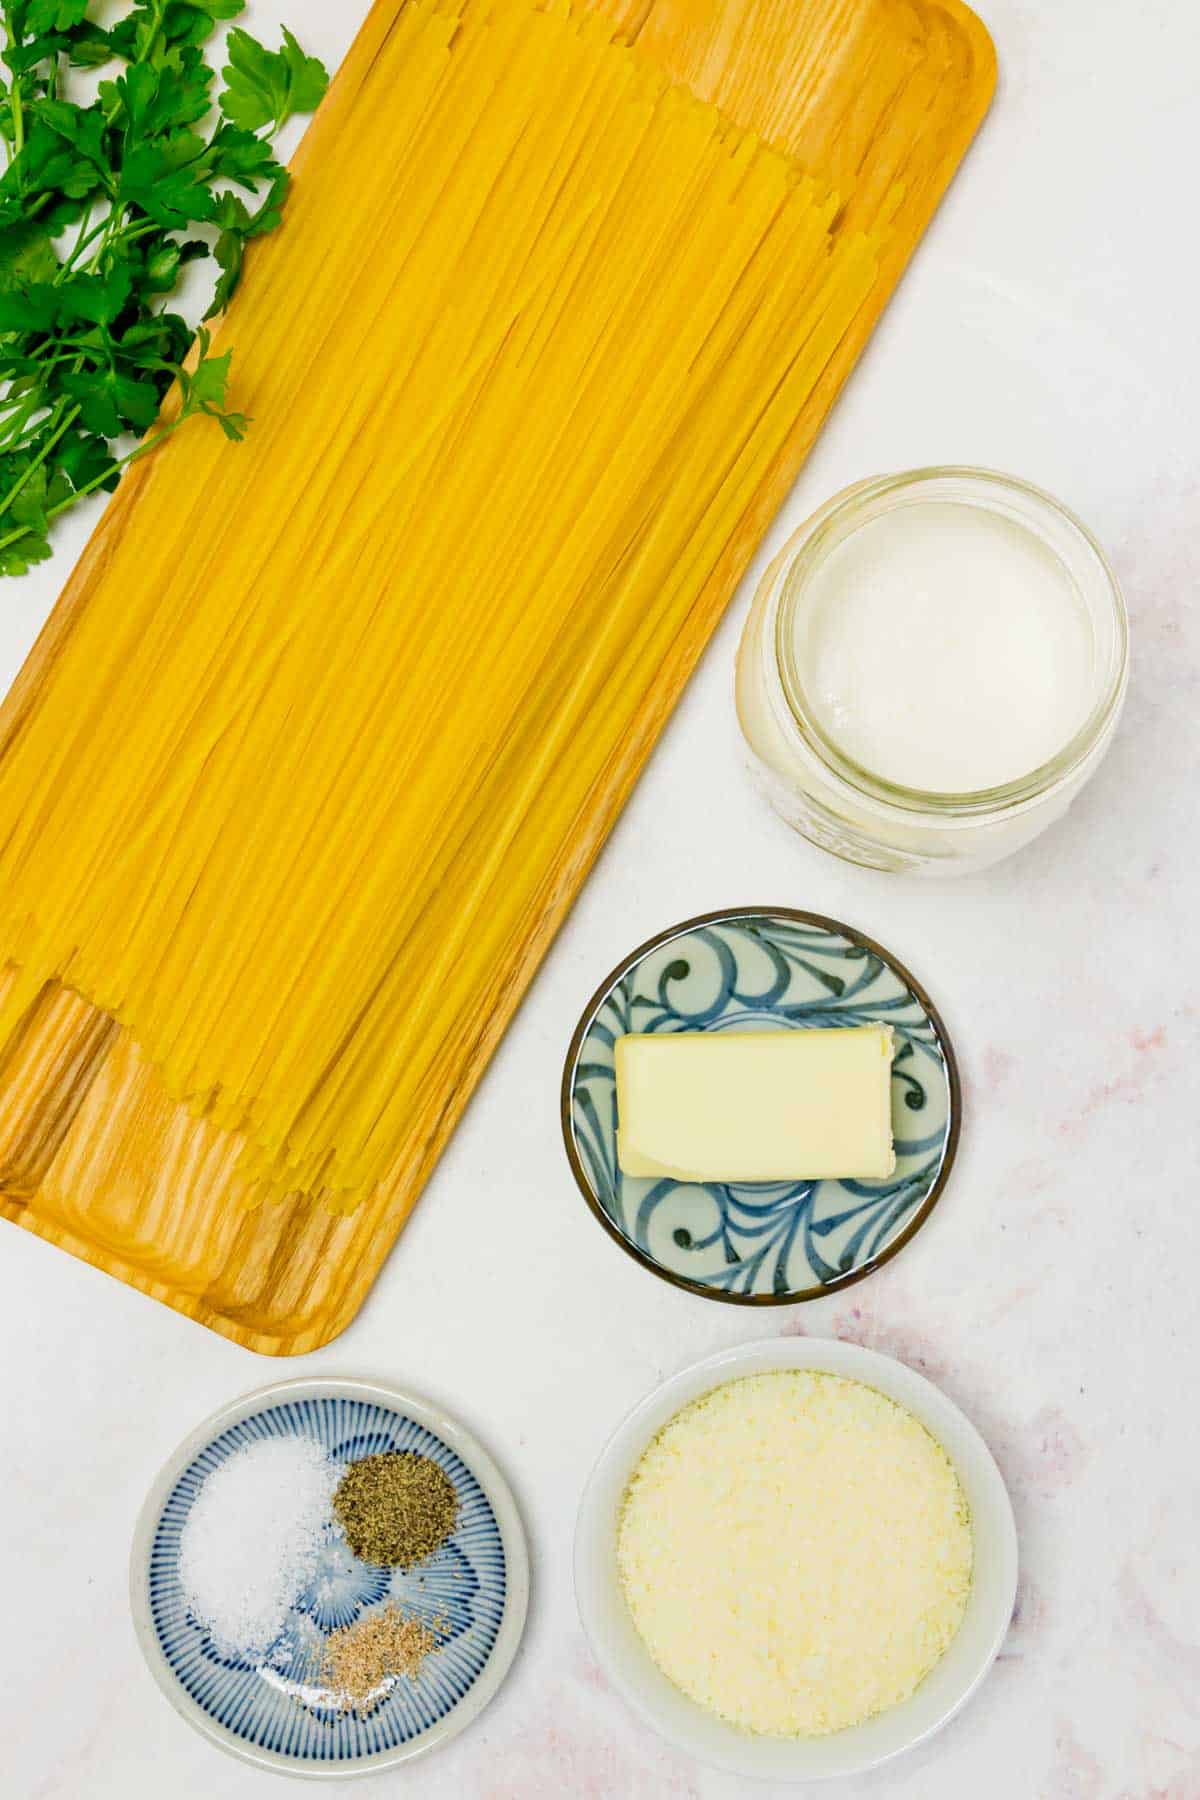 Ingredients including gluten-free pasta, butter, cream, and cheese are shown for Gluten-Free Fettuccine Alfredo.